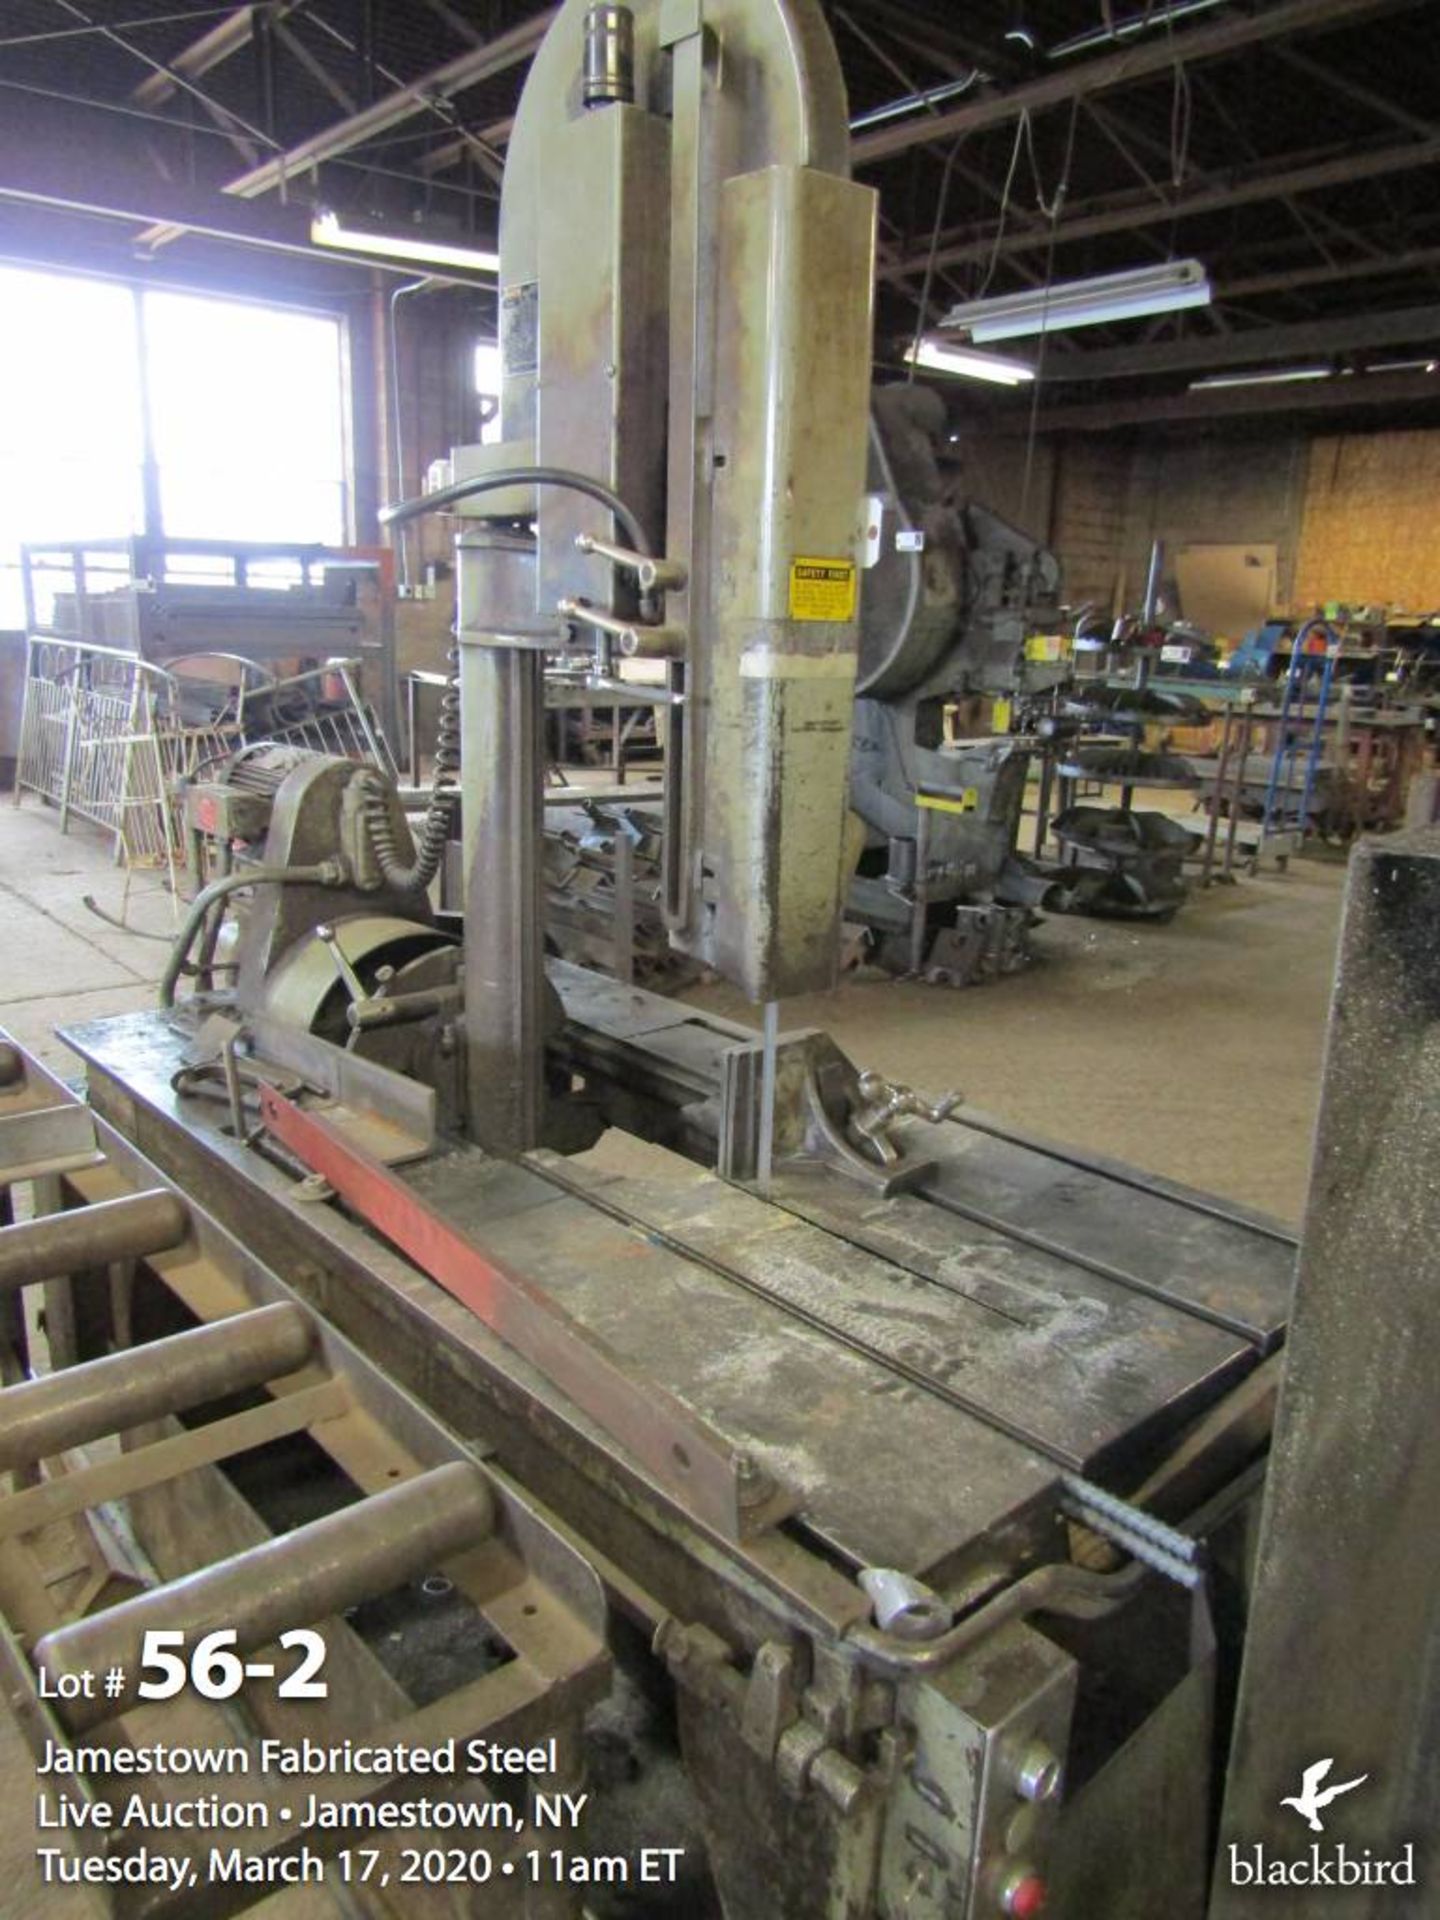 Marvel belt driven band saw 6 speed approx. 20" cut, 1hp. 3ph. - Image 3 of 3